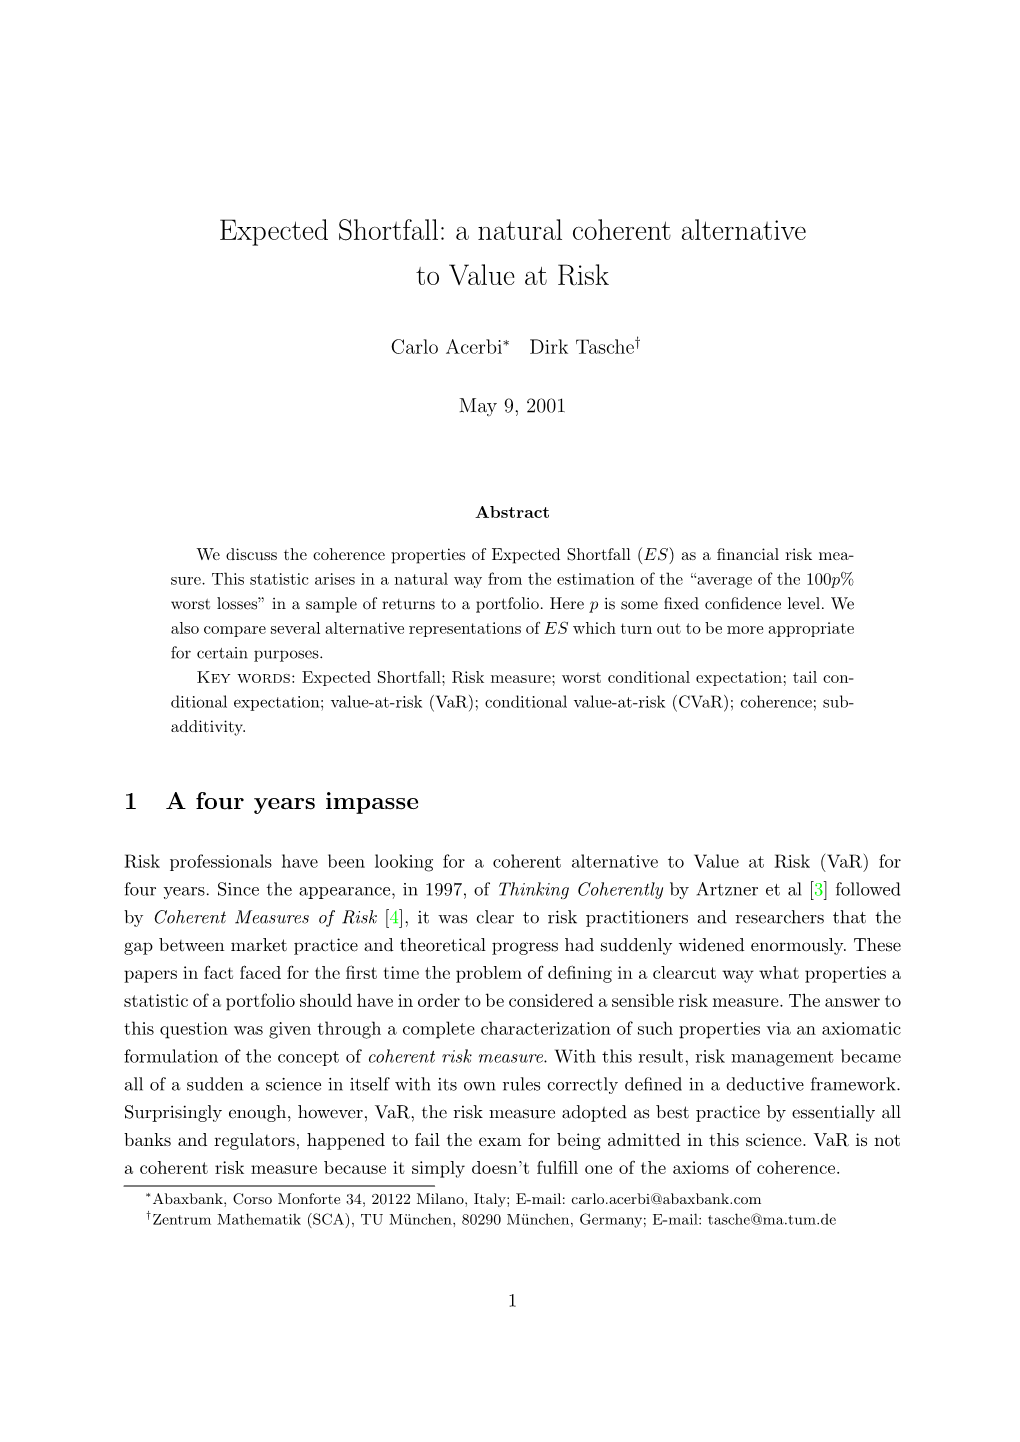 Expected Shortfall: a Natural Coherent Alternative to Value at Risk